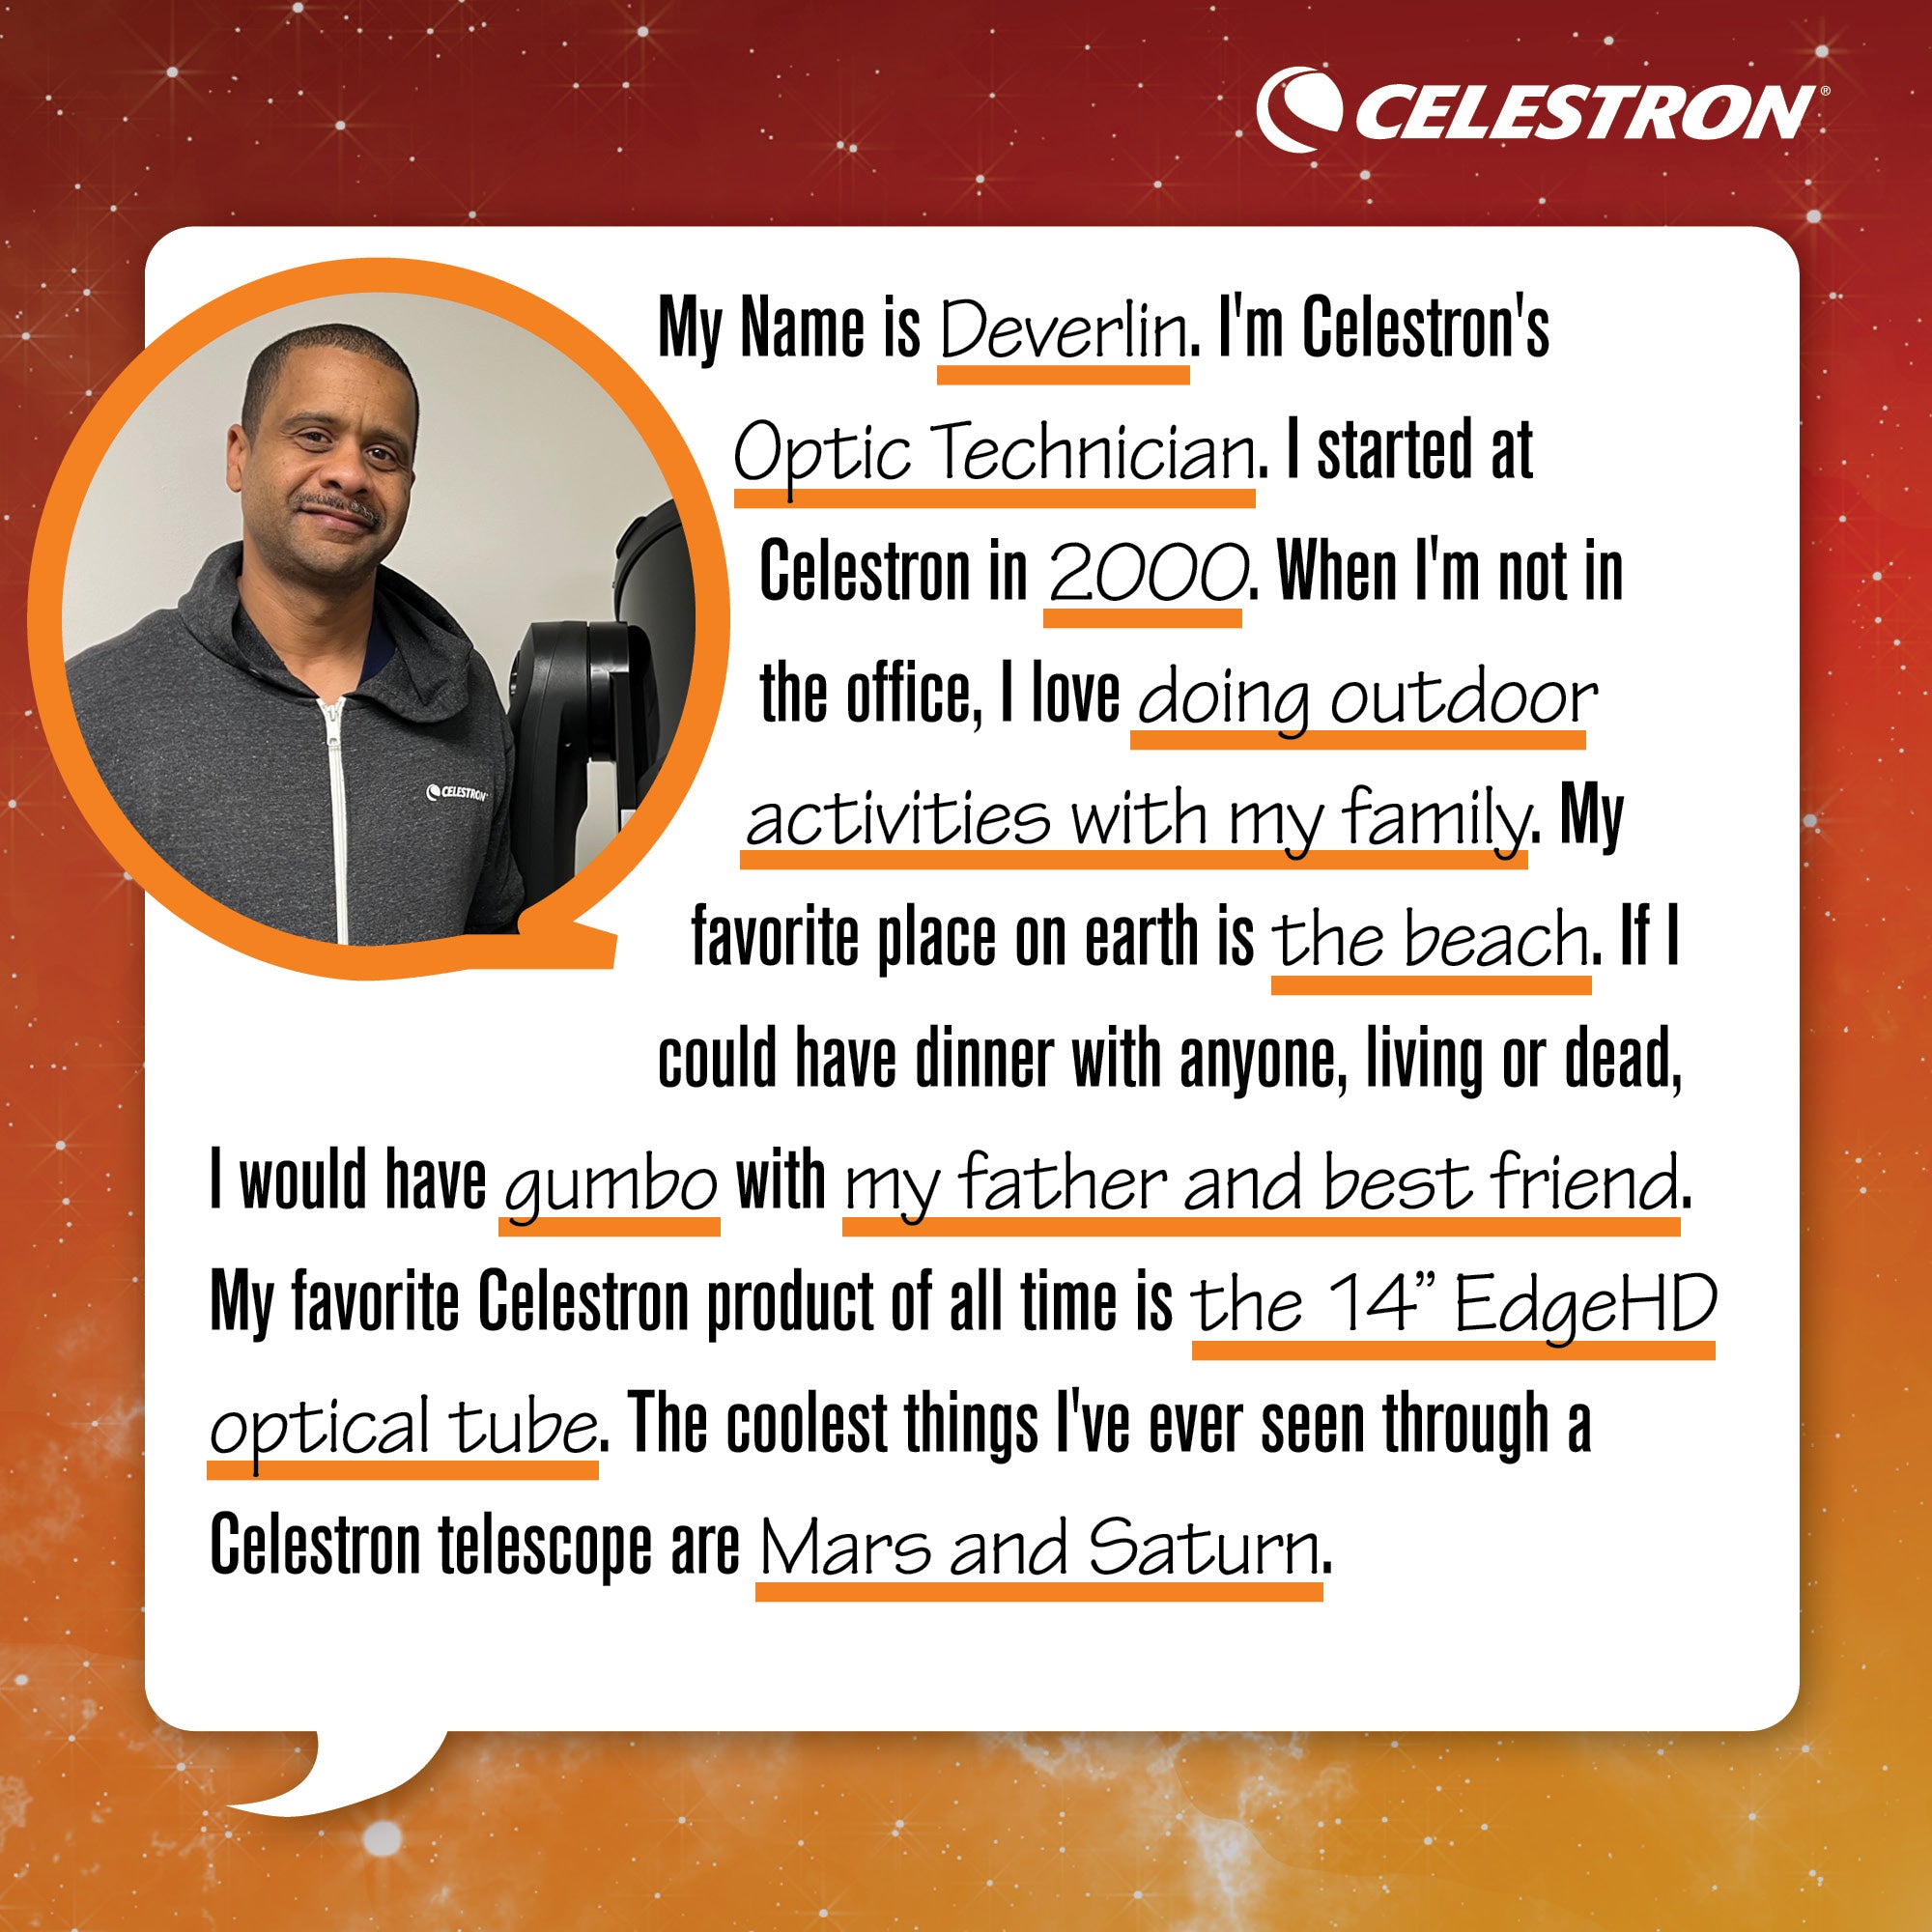 My name is Deverlin. I'm Celestron's Optic Technician. I started at Celestron in 2000. When I'm not in the office, I love doing outdoor activities with my family.  My favorite place on Earth is the beach. If I could have dinner with anyone, living or dead, I would have gumbo with my father and best friend. My favorite Celestron product of all time is the 14 Edgehd optical tube. The coolest things I’ve ever seen through a Celestron telescope are Mars and Saturn.